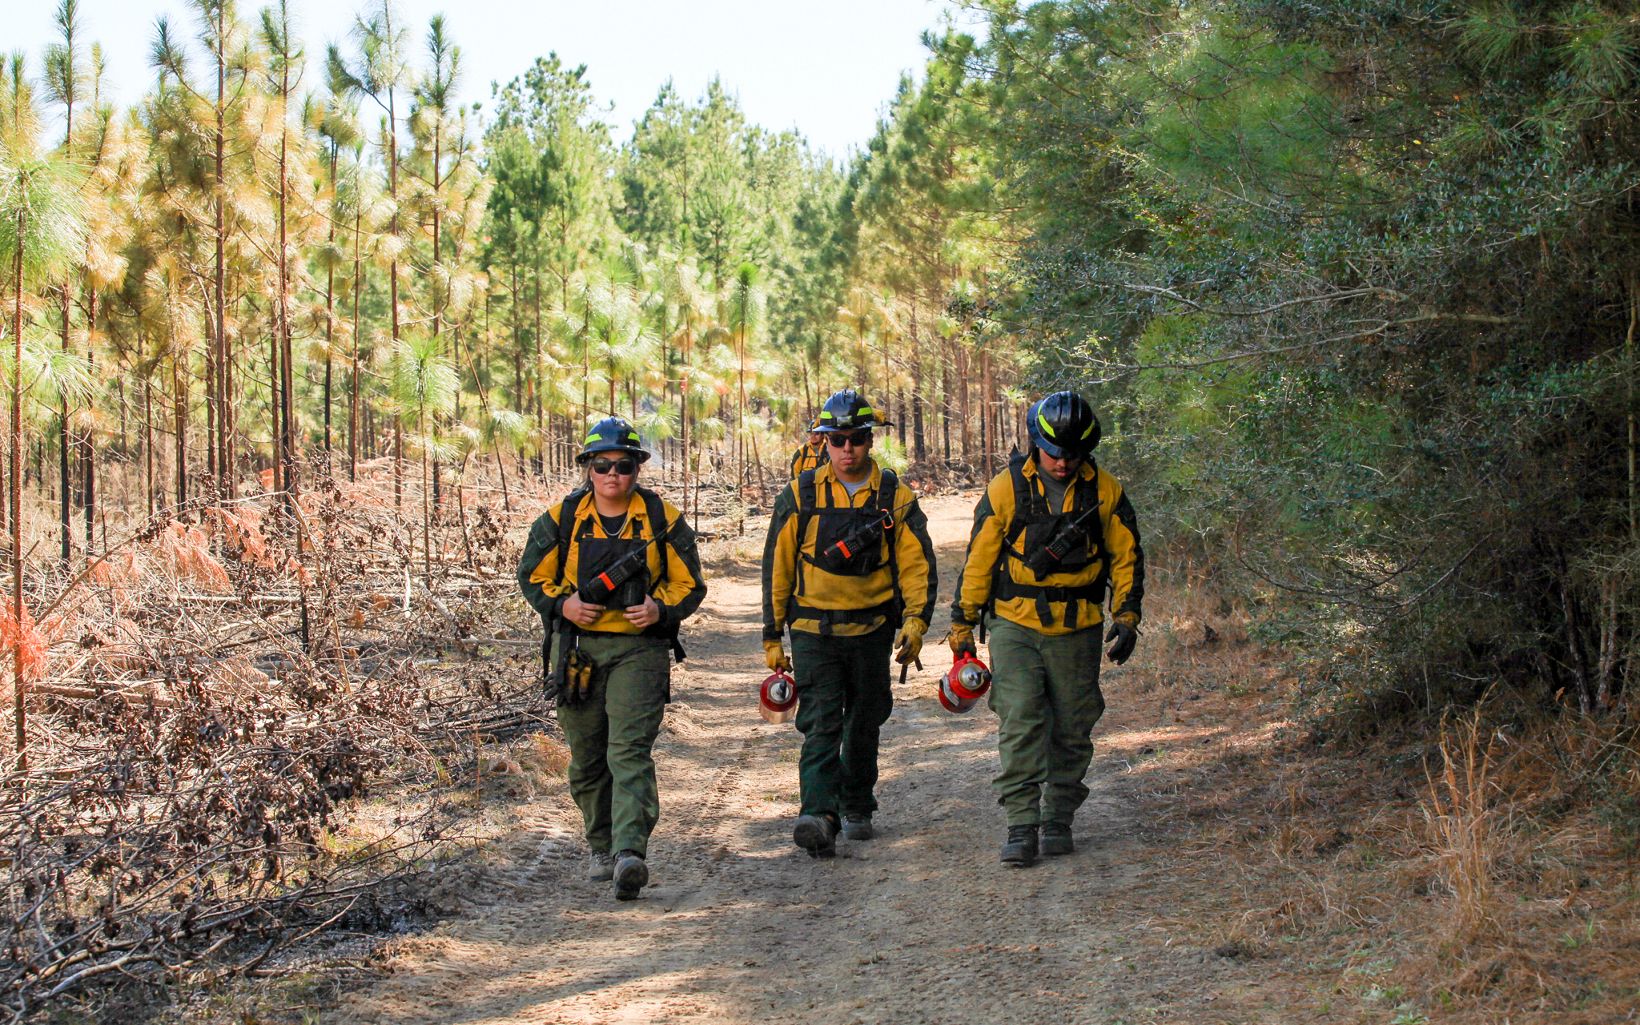 Three Wildland Fire Management crew members walk along a red dirt pathway, checking to see if the flames from a prescribed fire have been extinguished throughout the forest to the left.